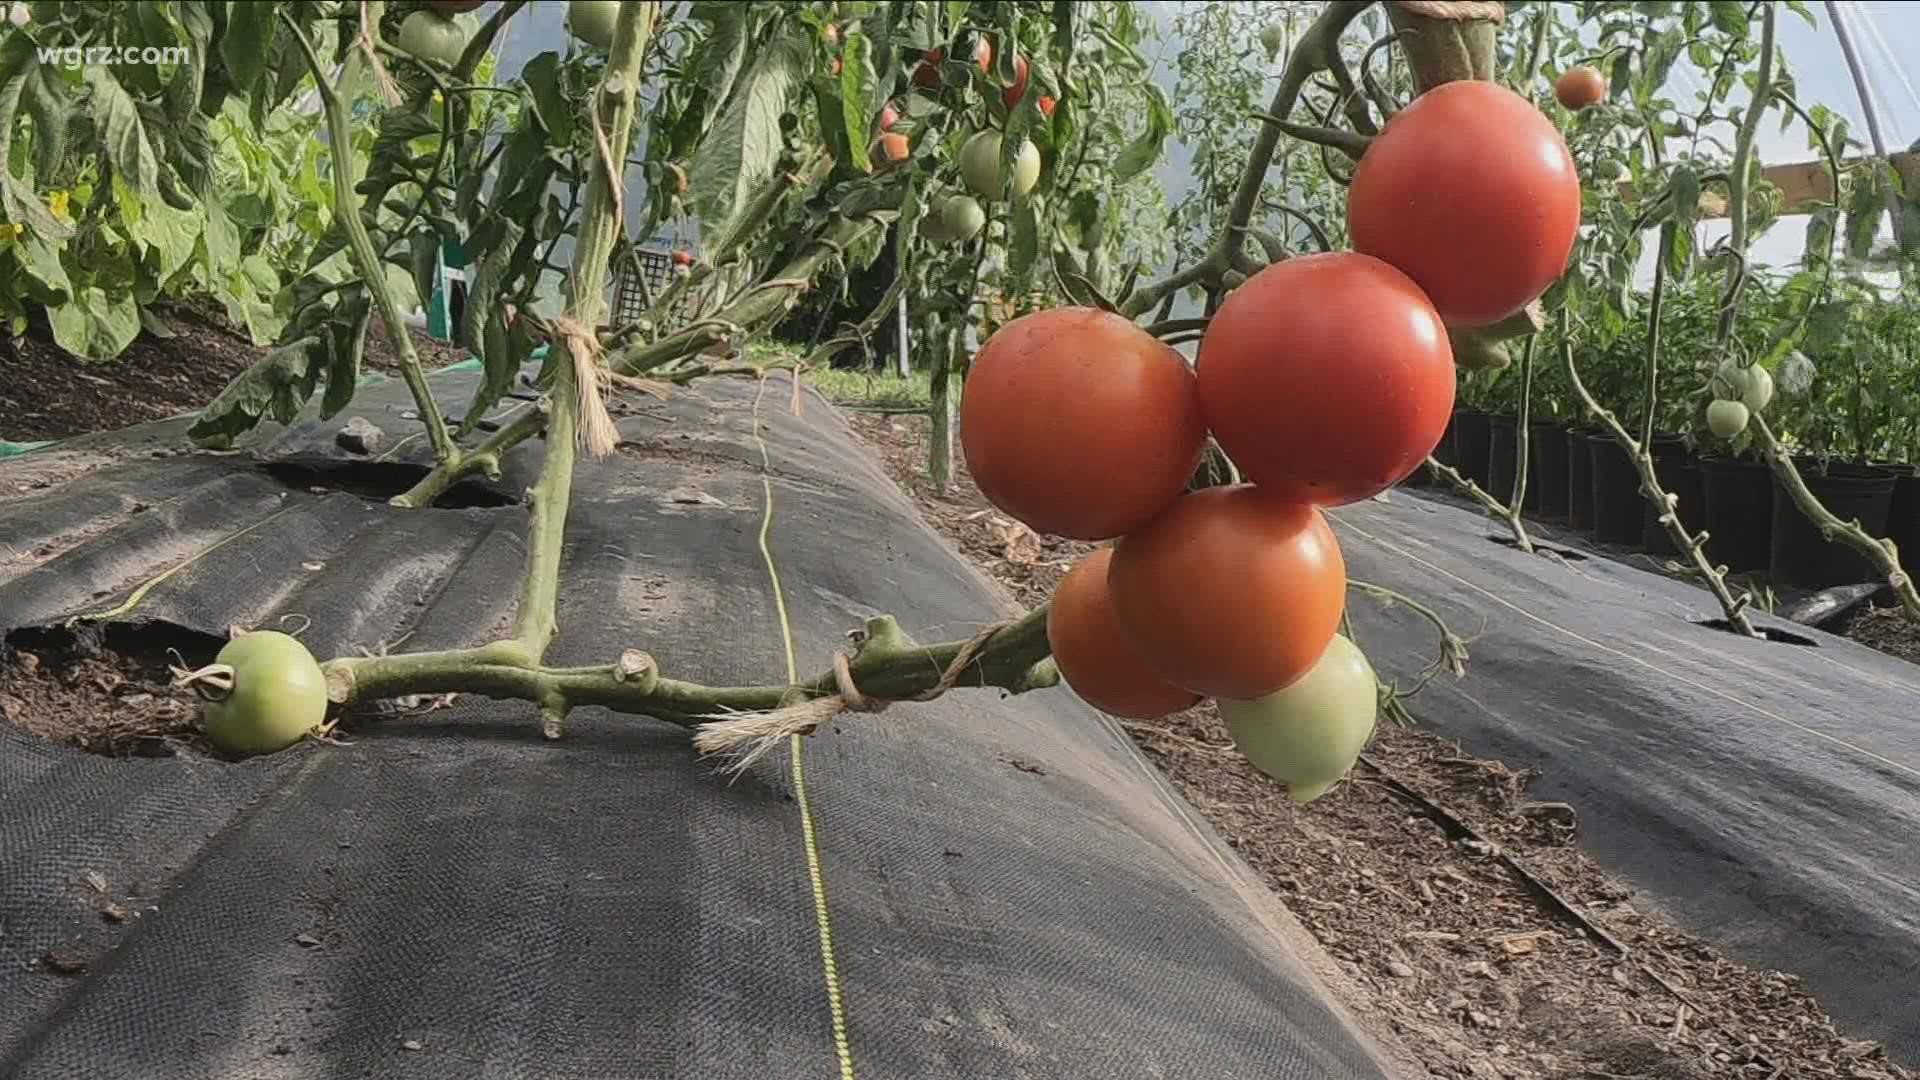 As drought conditions intensify, local farmers are finding ways to adapt. But rural farms aren't the only ones affected.